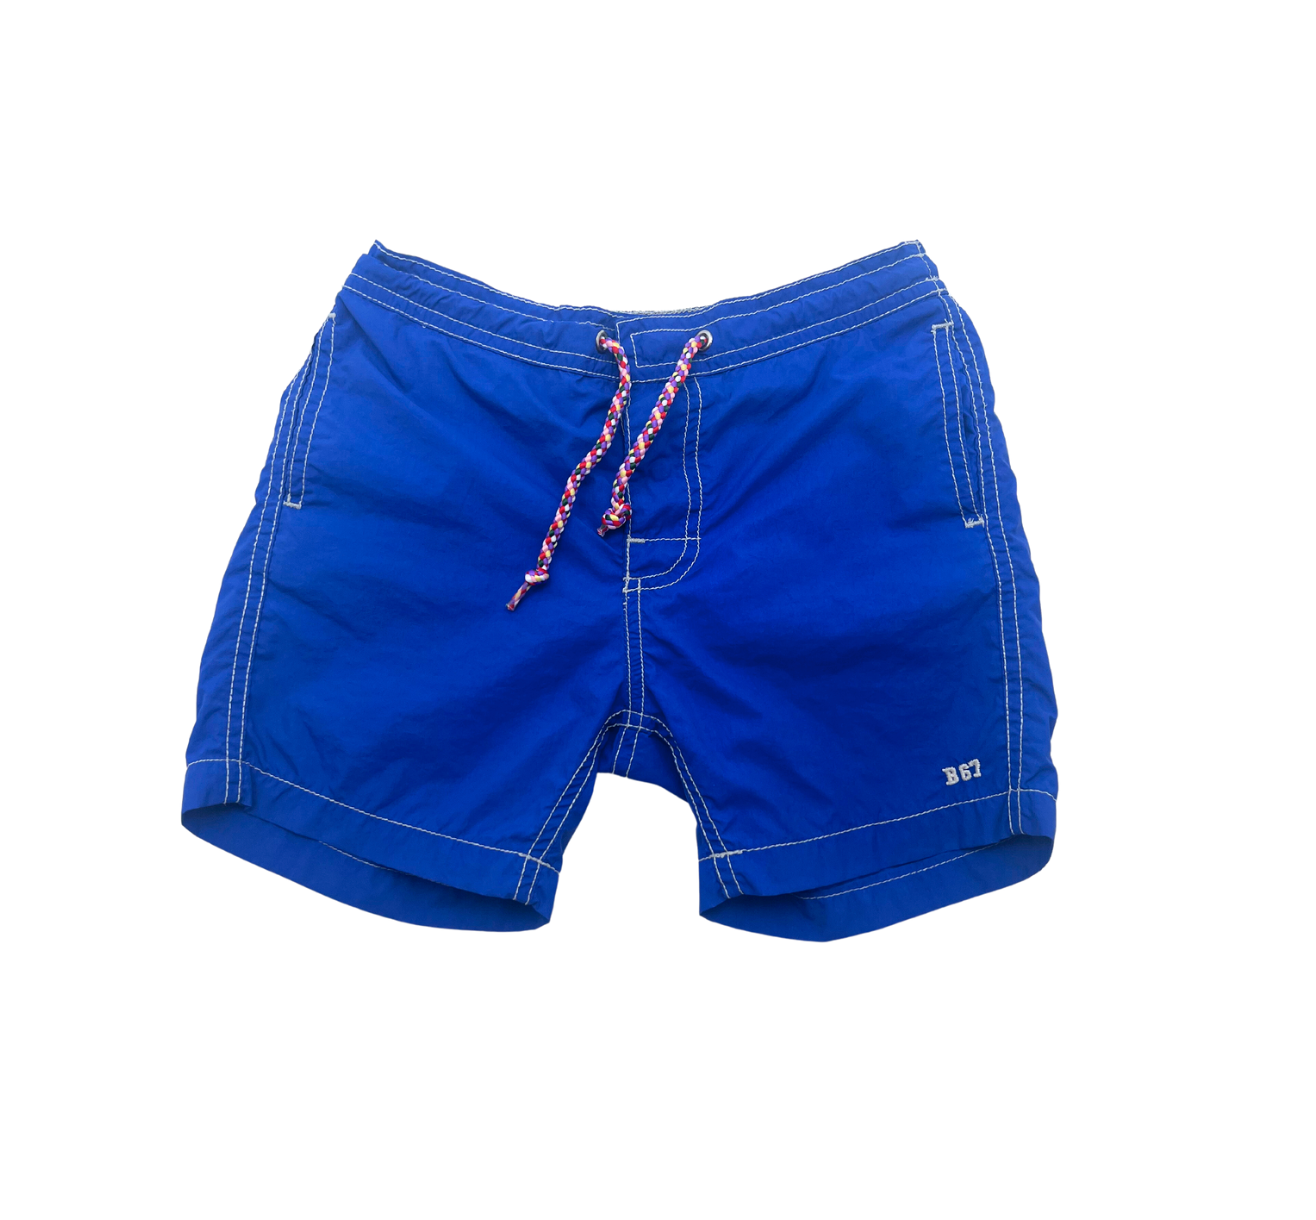 BONPOINT - Blue swimsuit - 6 years old